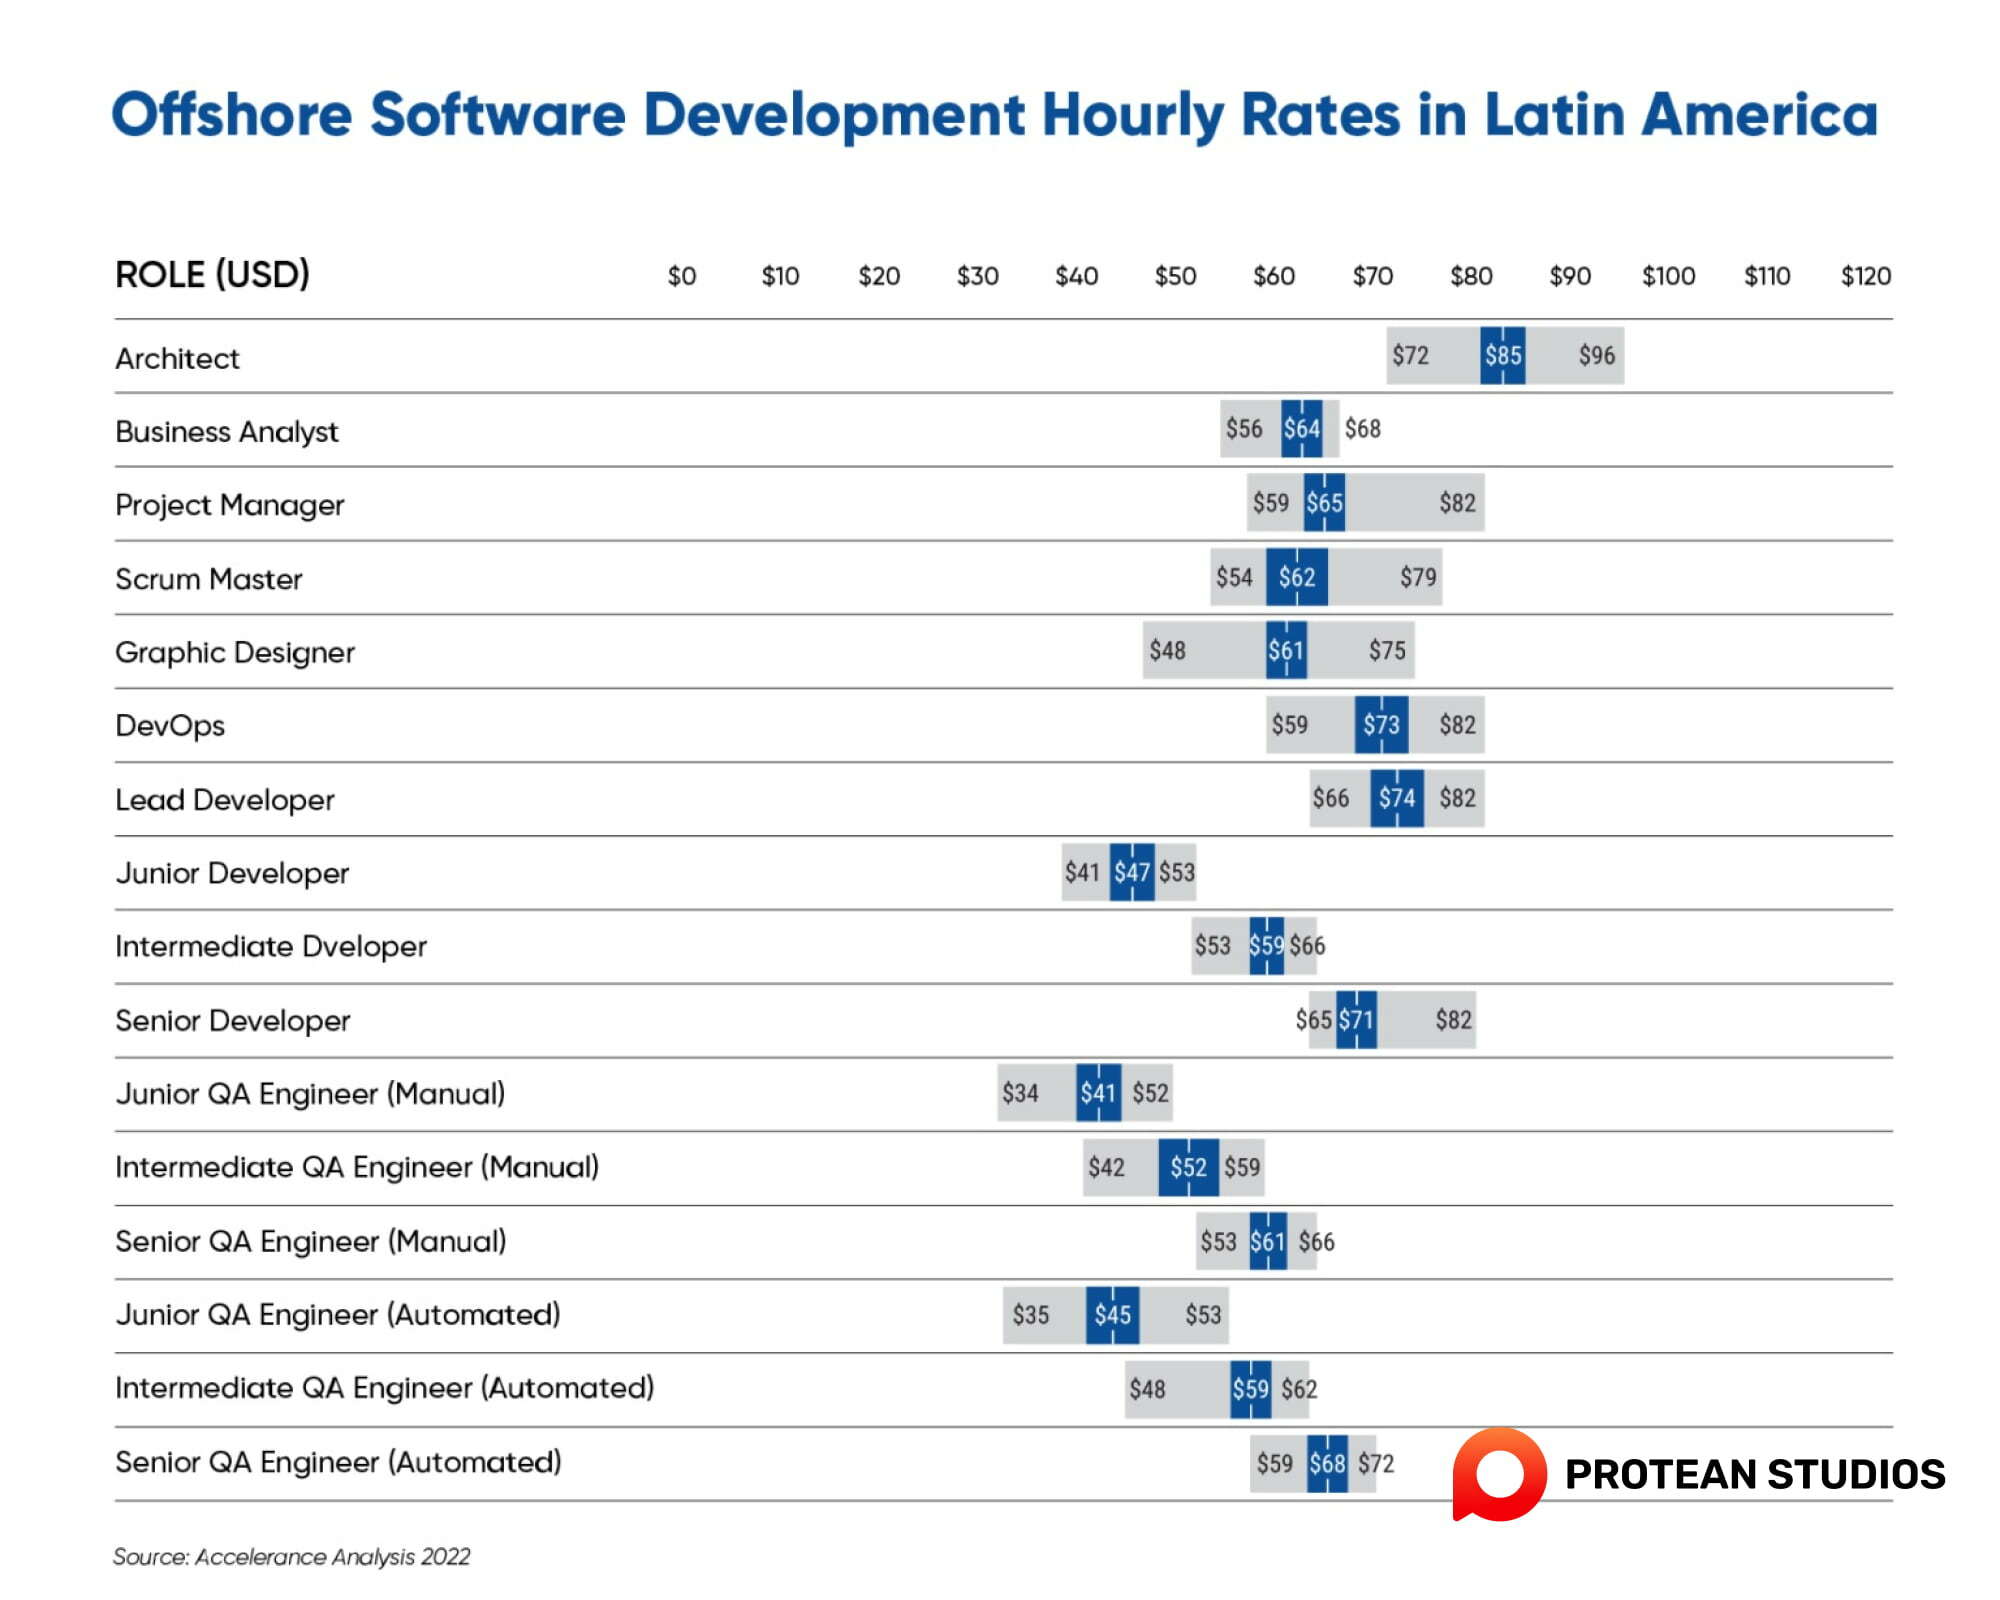 Offshore outsourcing rates in Latin America